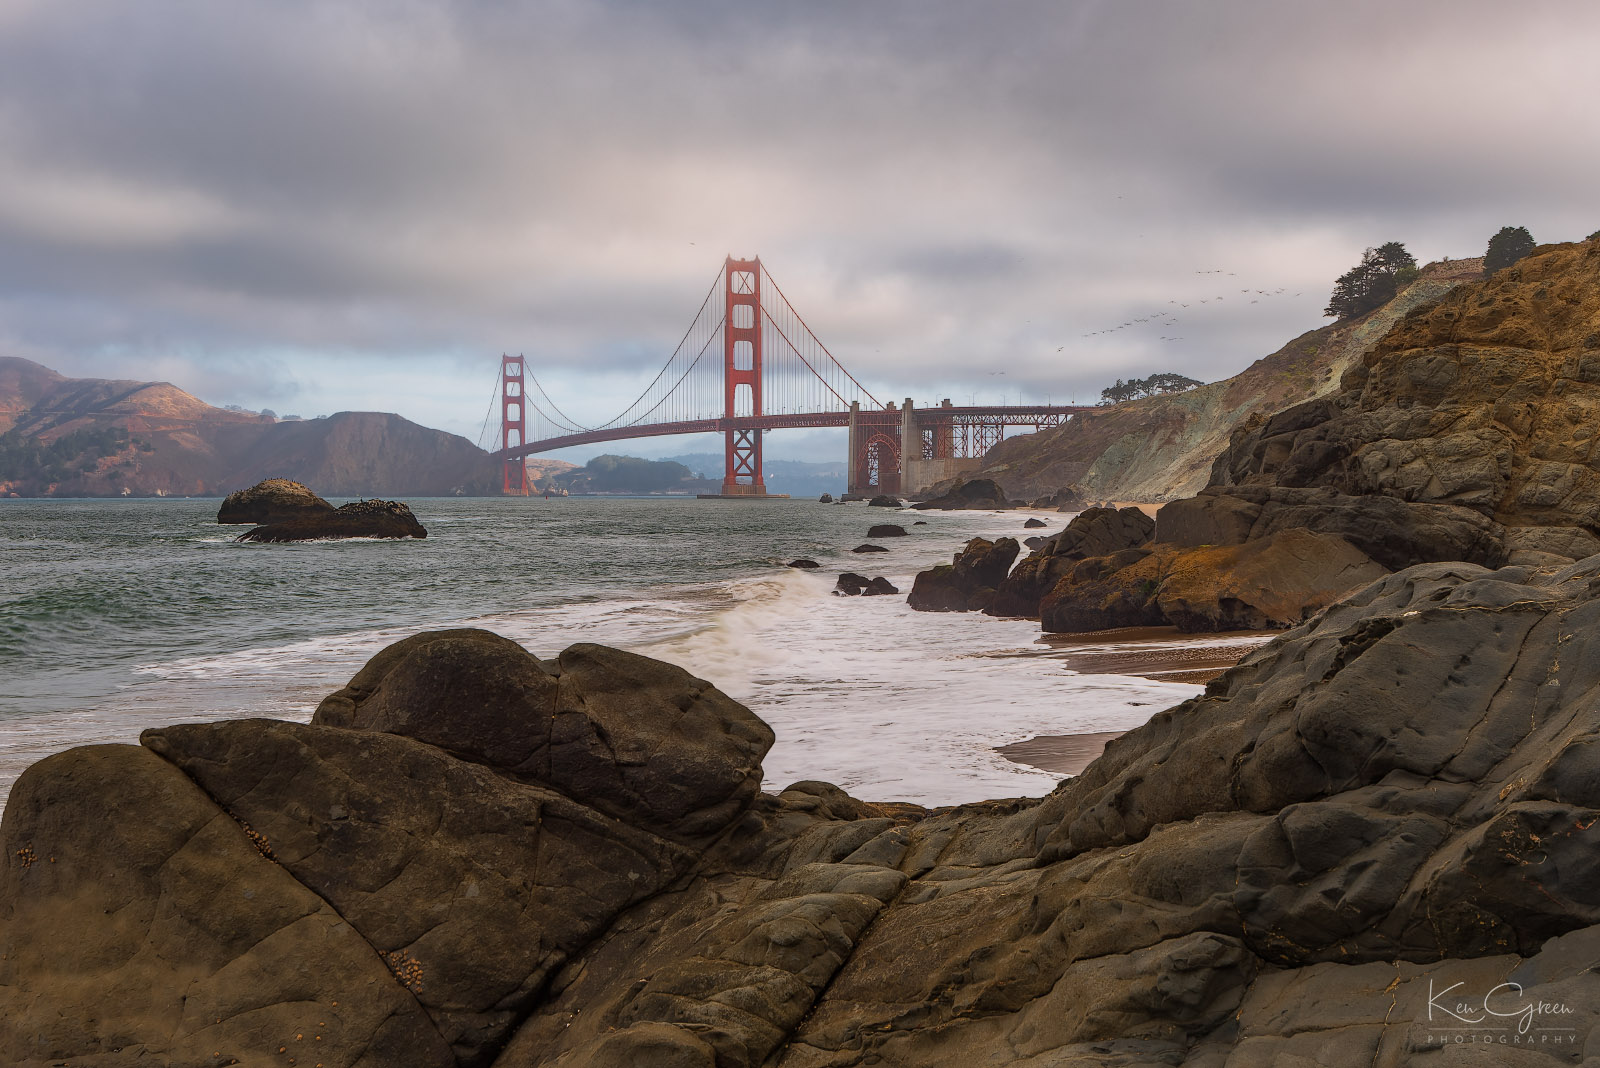 A view of the Golden Gate Bridge from Baker Beach in San Francisco.